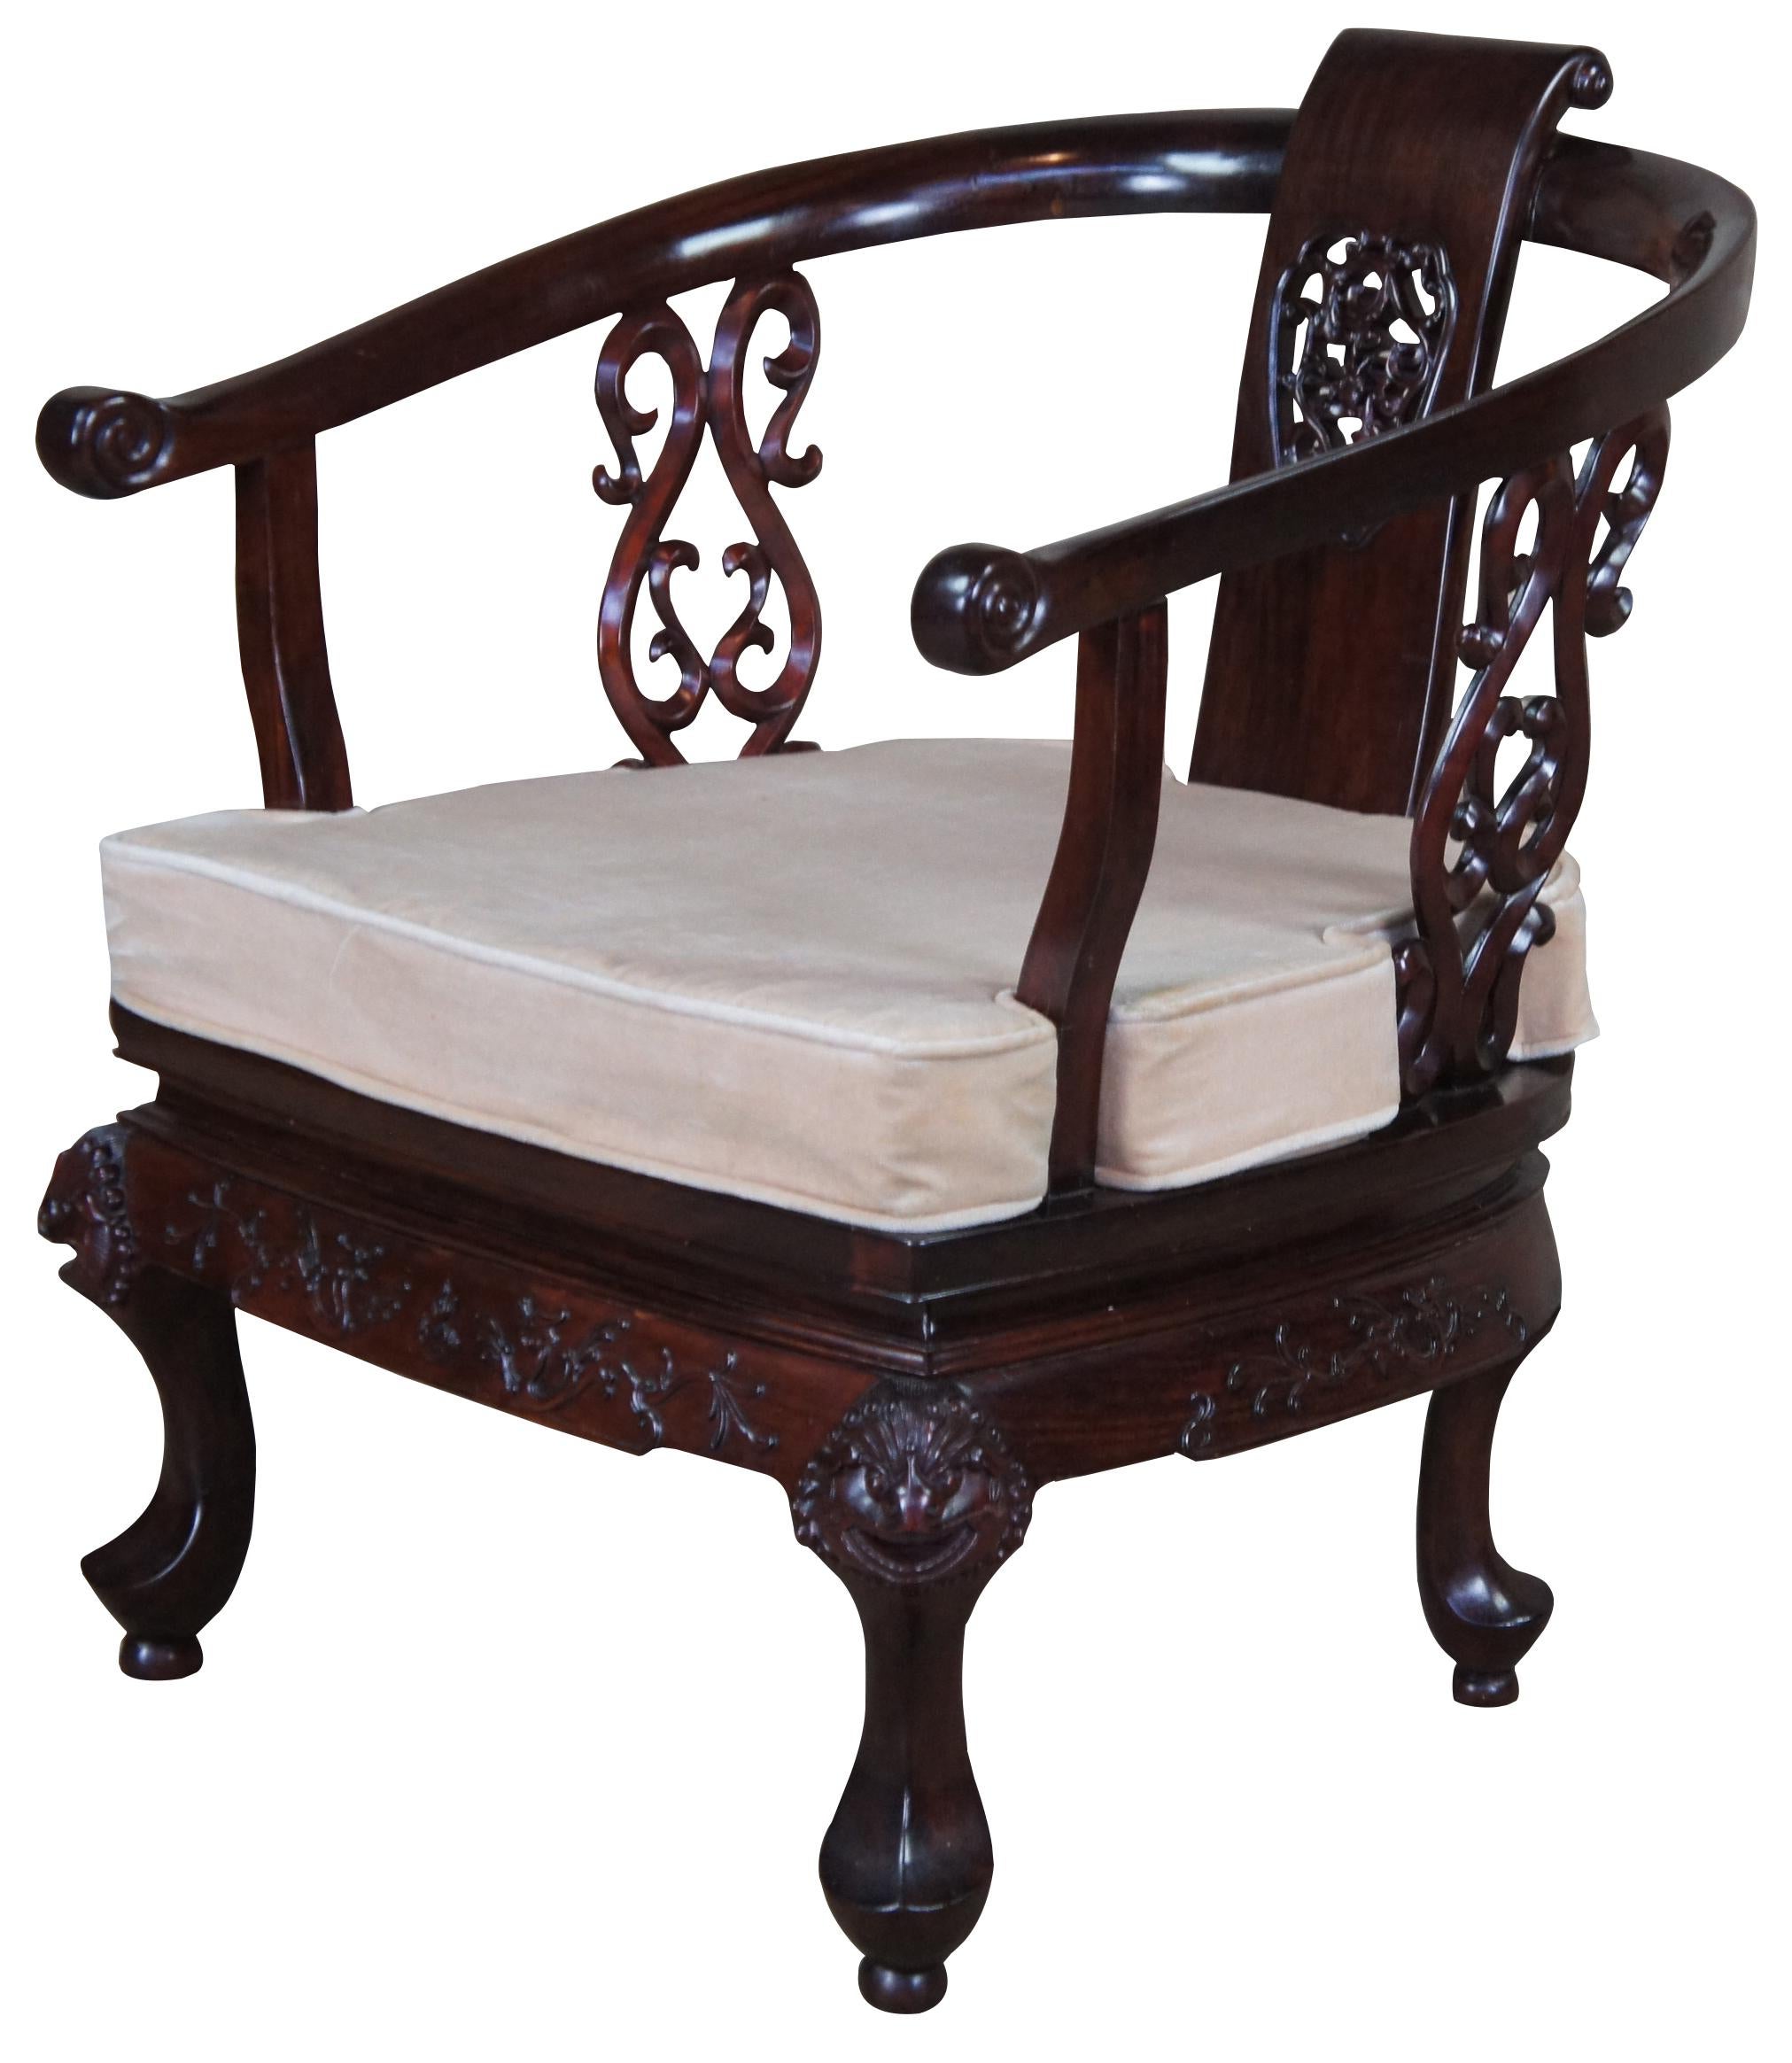 Vintage Chinese horse shoe or yoke arm chair. Made of Rosewood featuring piereced splat, ornate supports, figural carved animal faces and serpent accents.
     